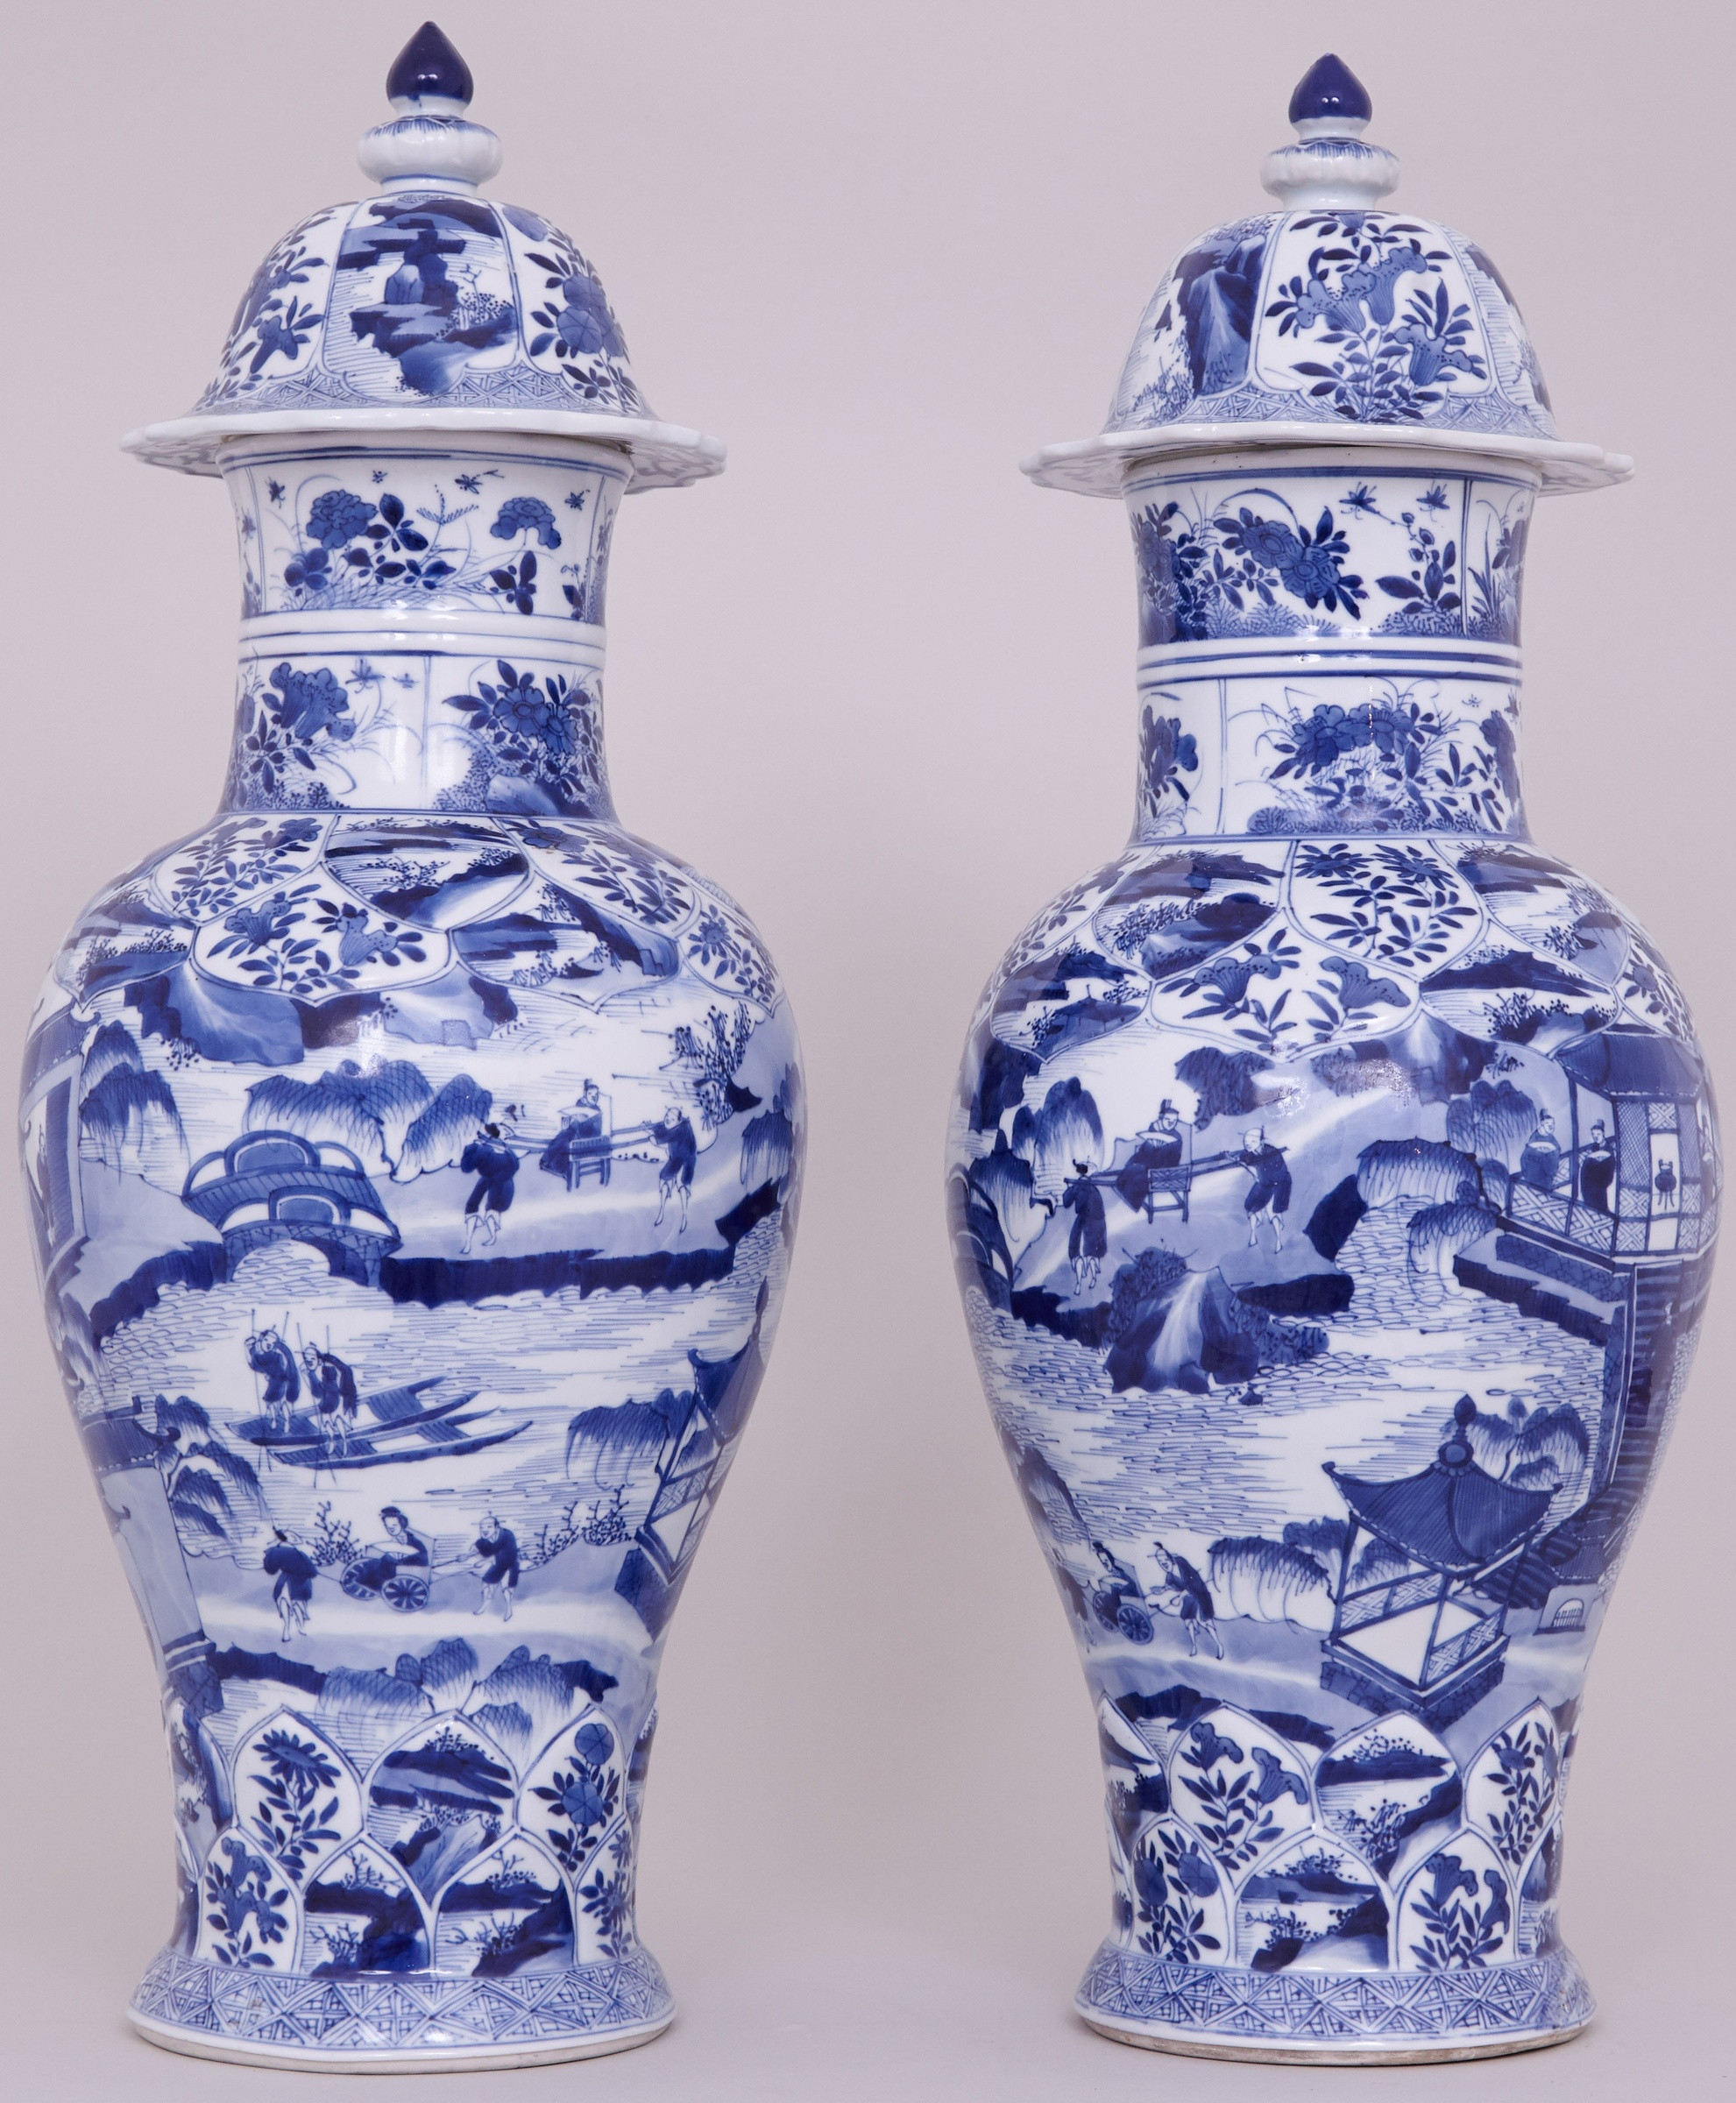 27 Unique Tall Cobalt Blue Glass Vase 2024 free download tall cobalt blue glass vase of a pair of highly unusual tall and fine chinese blue and white vases pertaining to a pair of highly unusual tall and fine chinese blue and white vases and cover